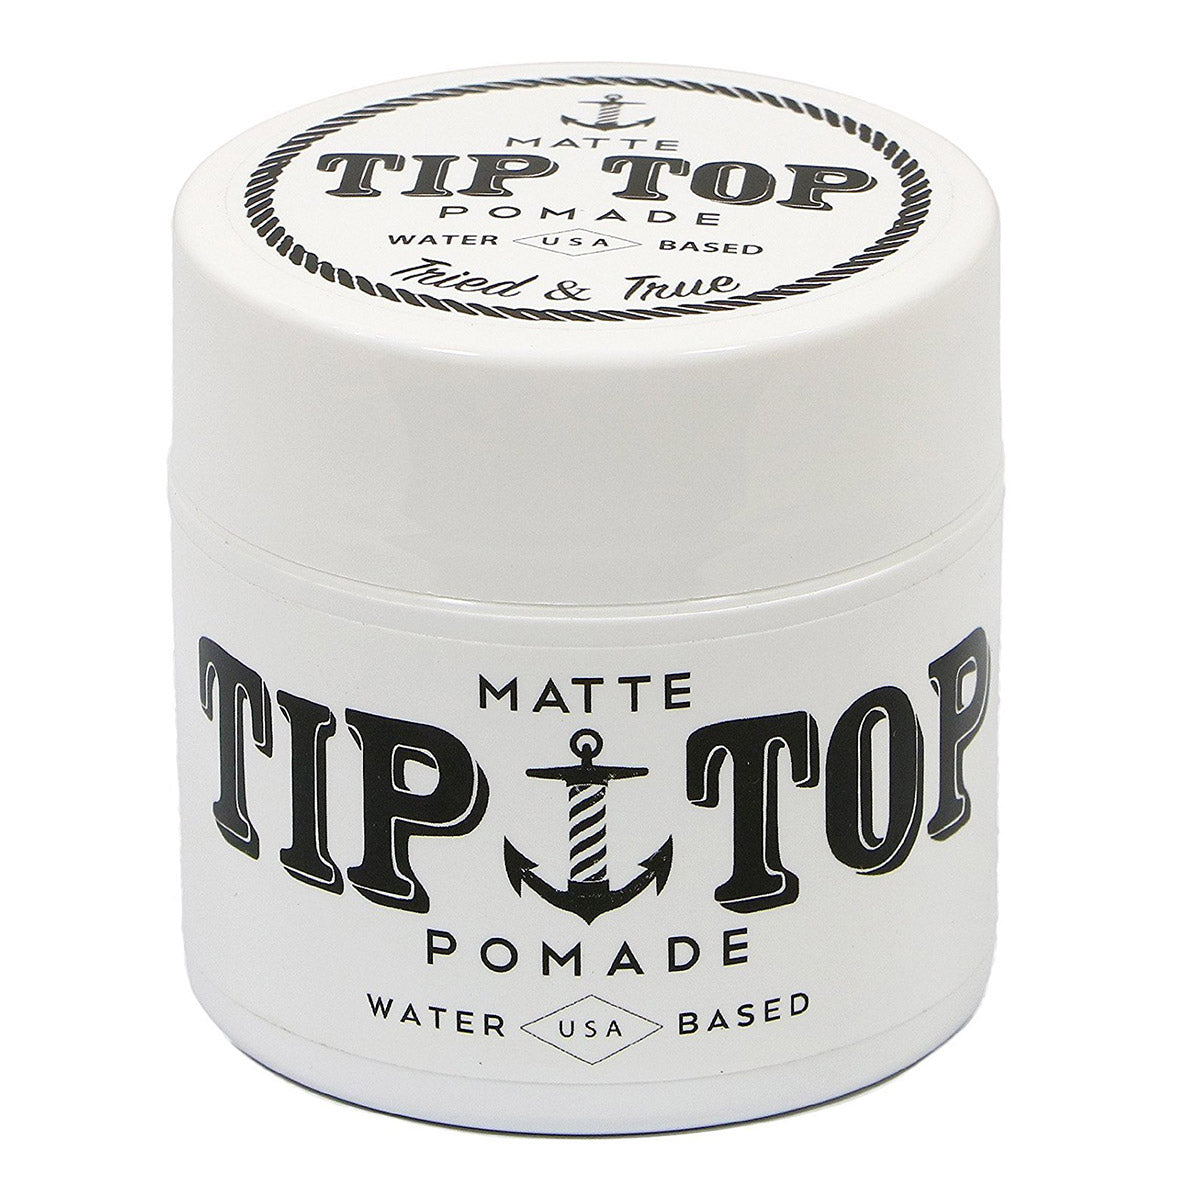 Tip Top Pomade in Matte, Strong Hold or Original